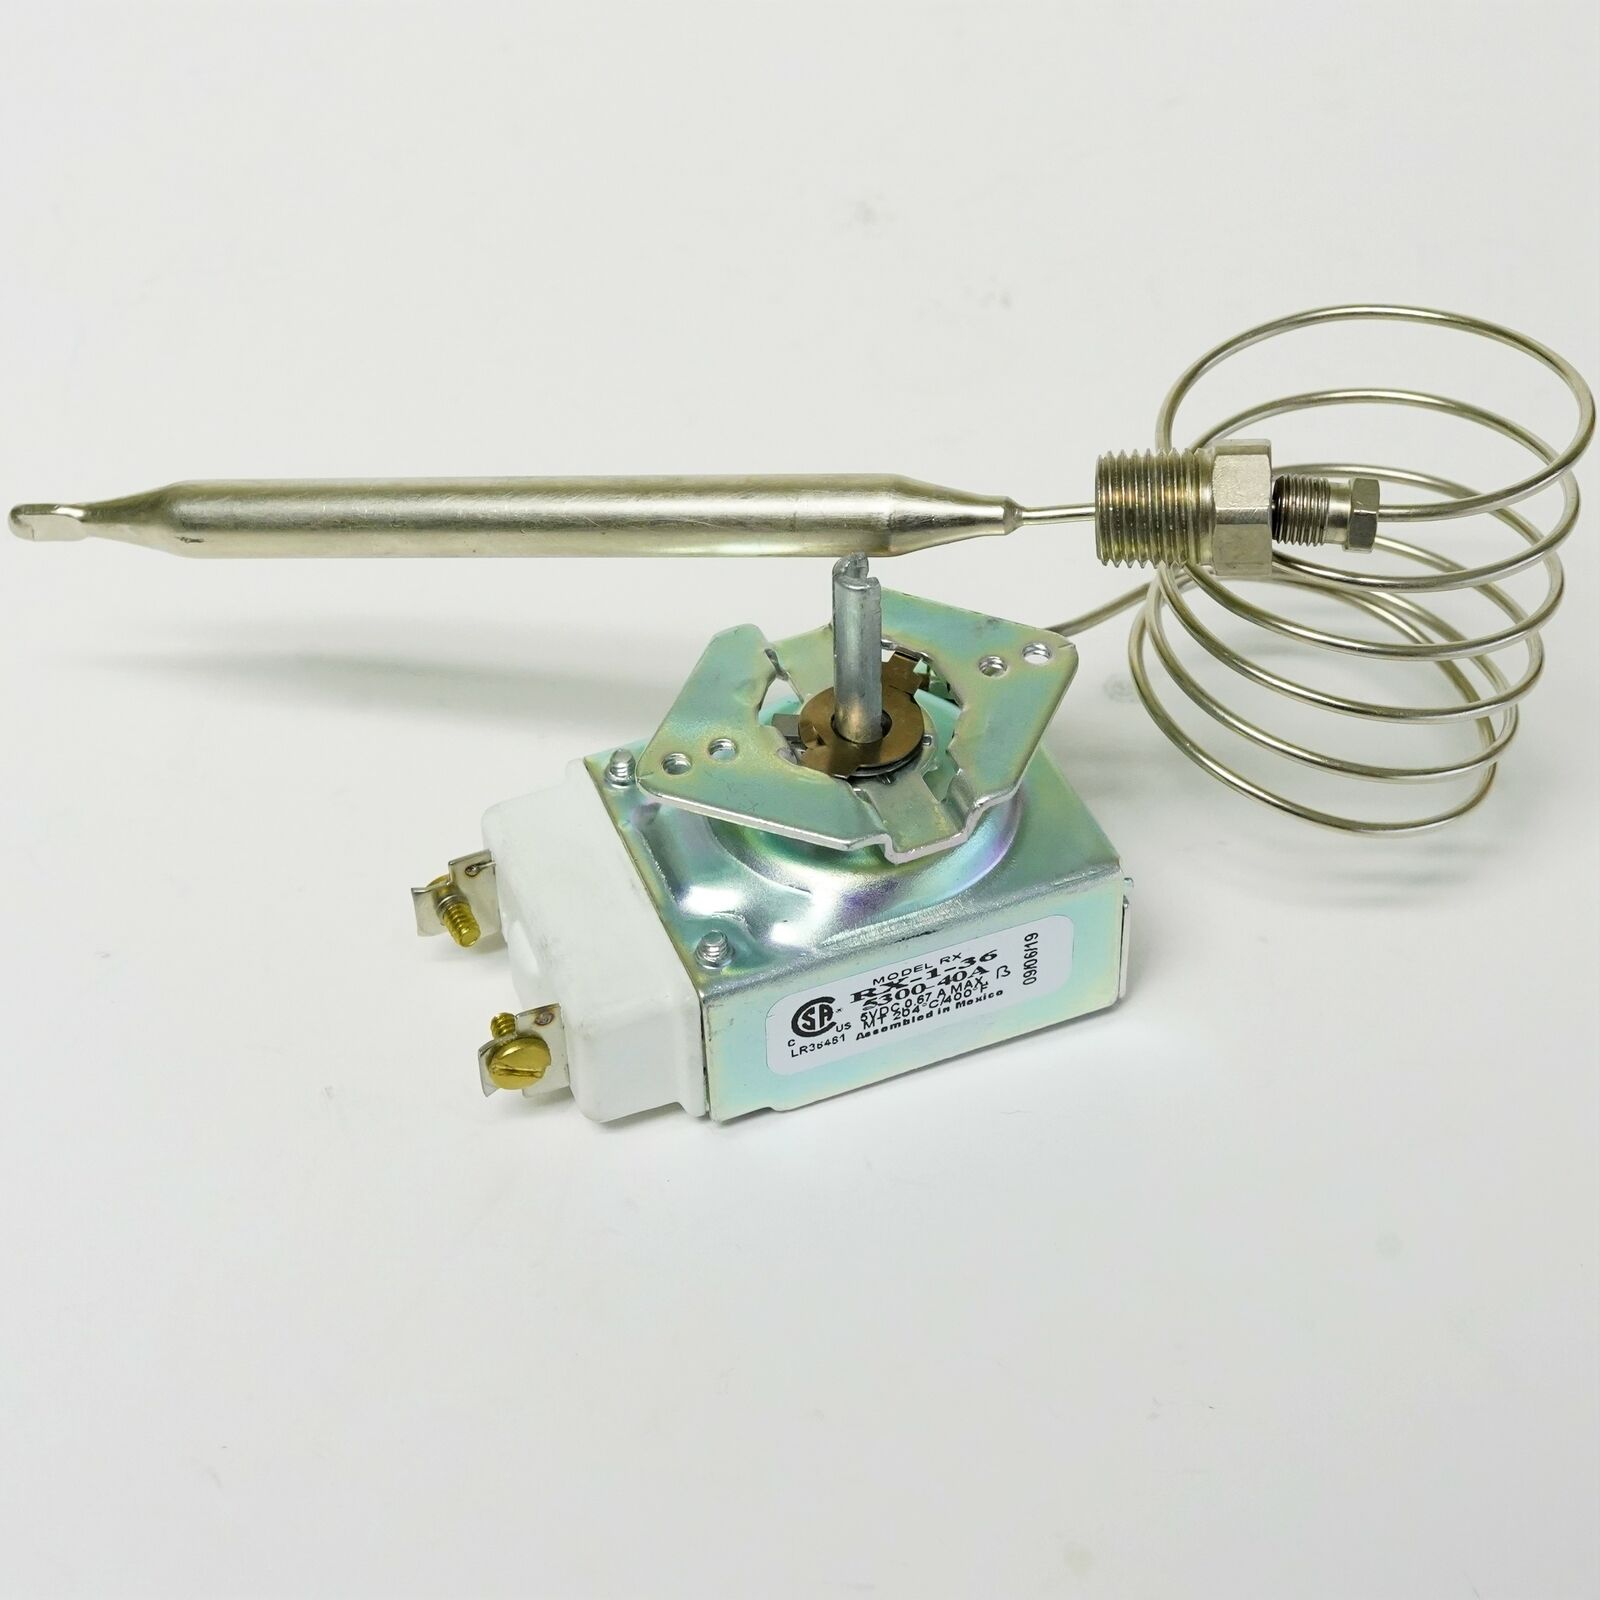 Robertshaw Oven Thermostat RX-1-36 For Pitco 60125401 Imperial, Dean, Blodgett,